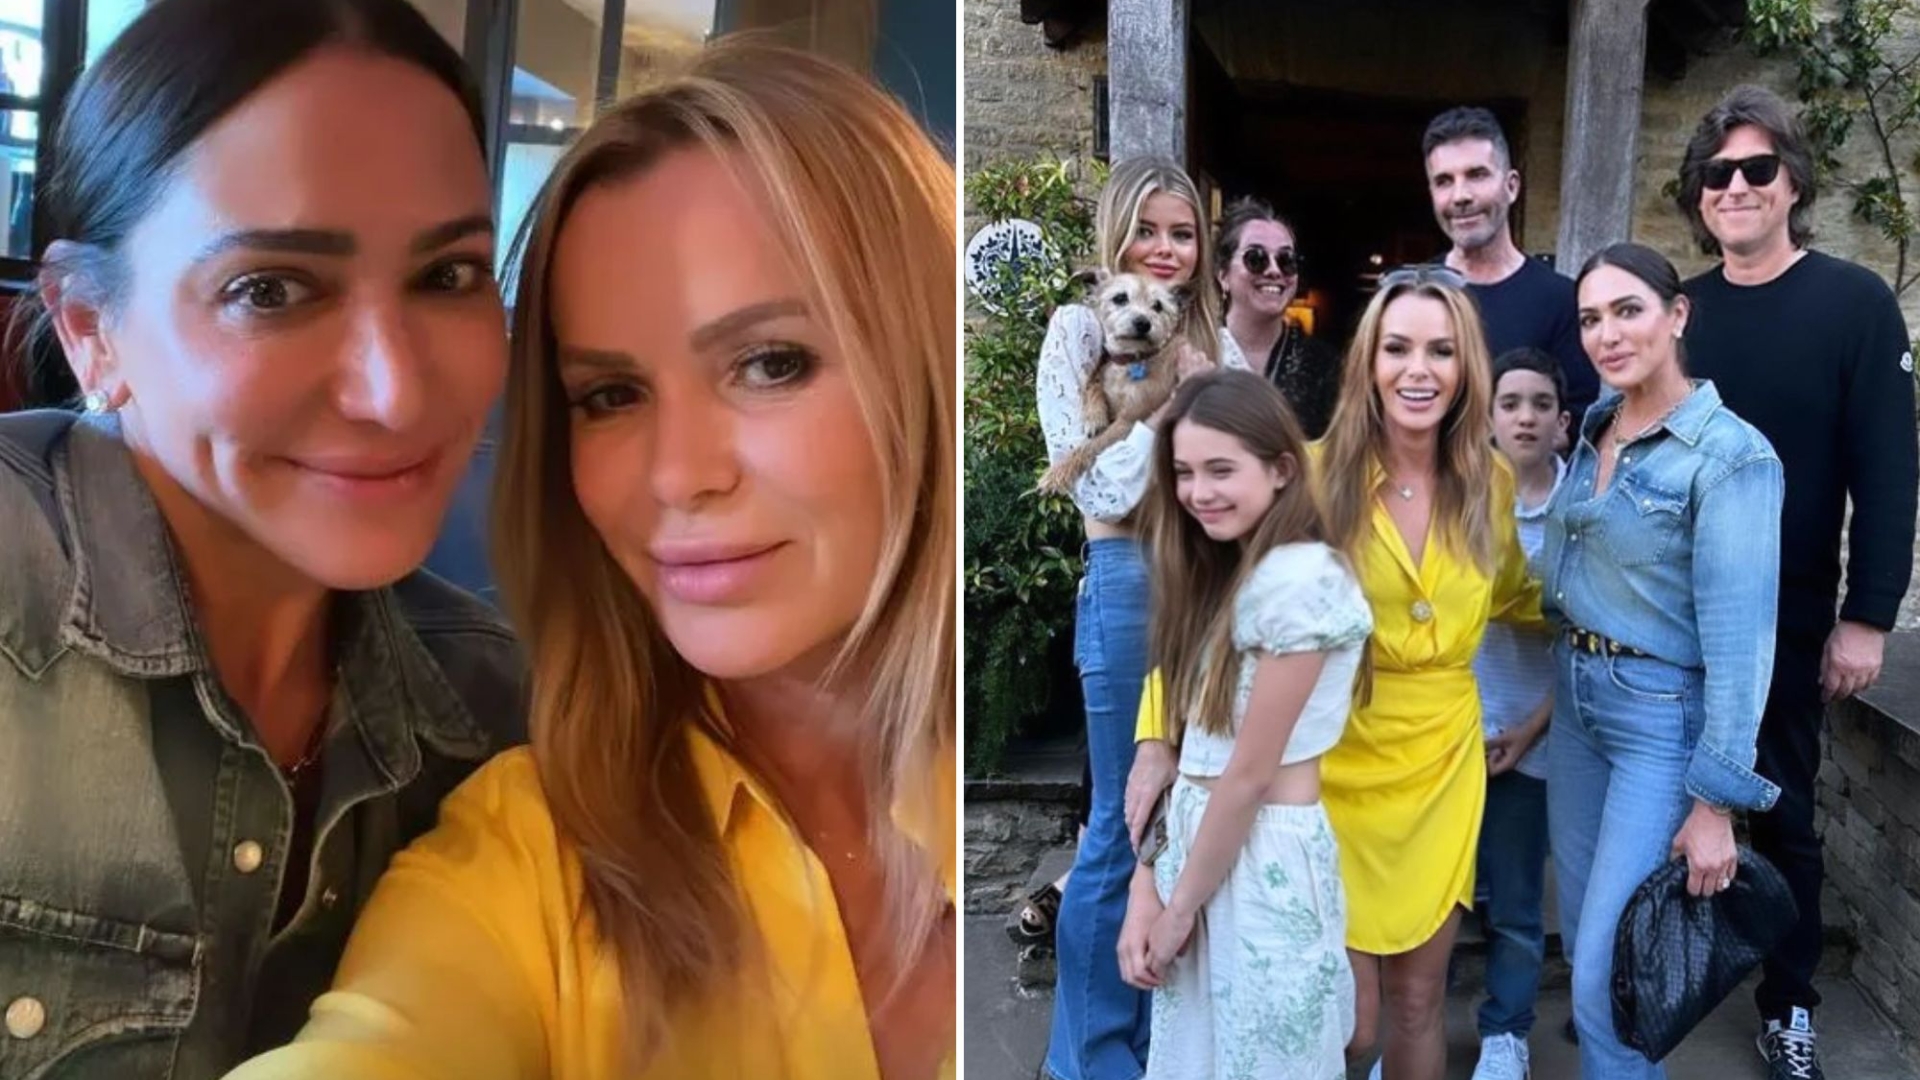 The BGT’s Amanda Holden, Simon Cowell and their families are having a joint celebration ahead of the semi-finals.